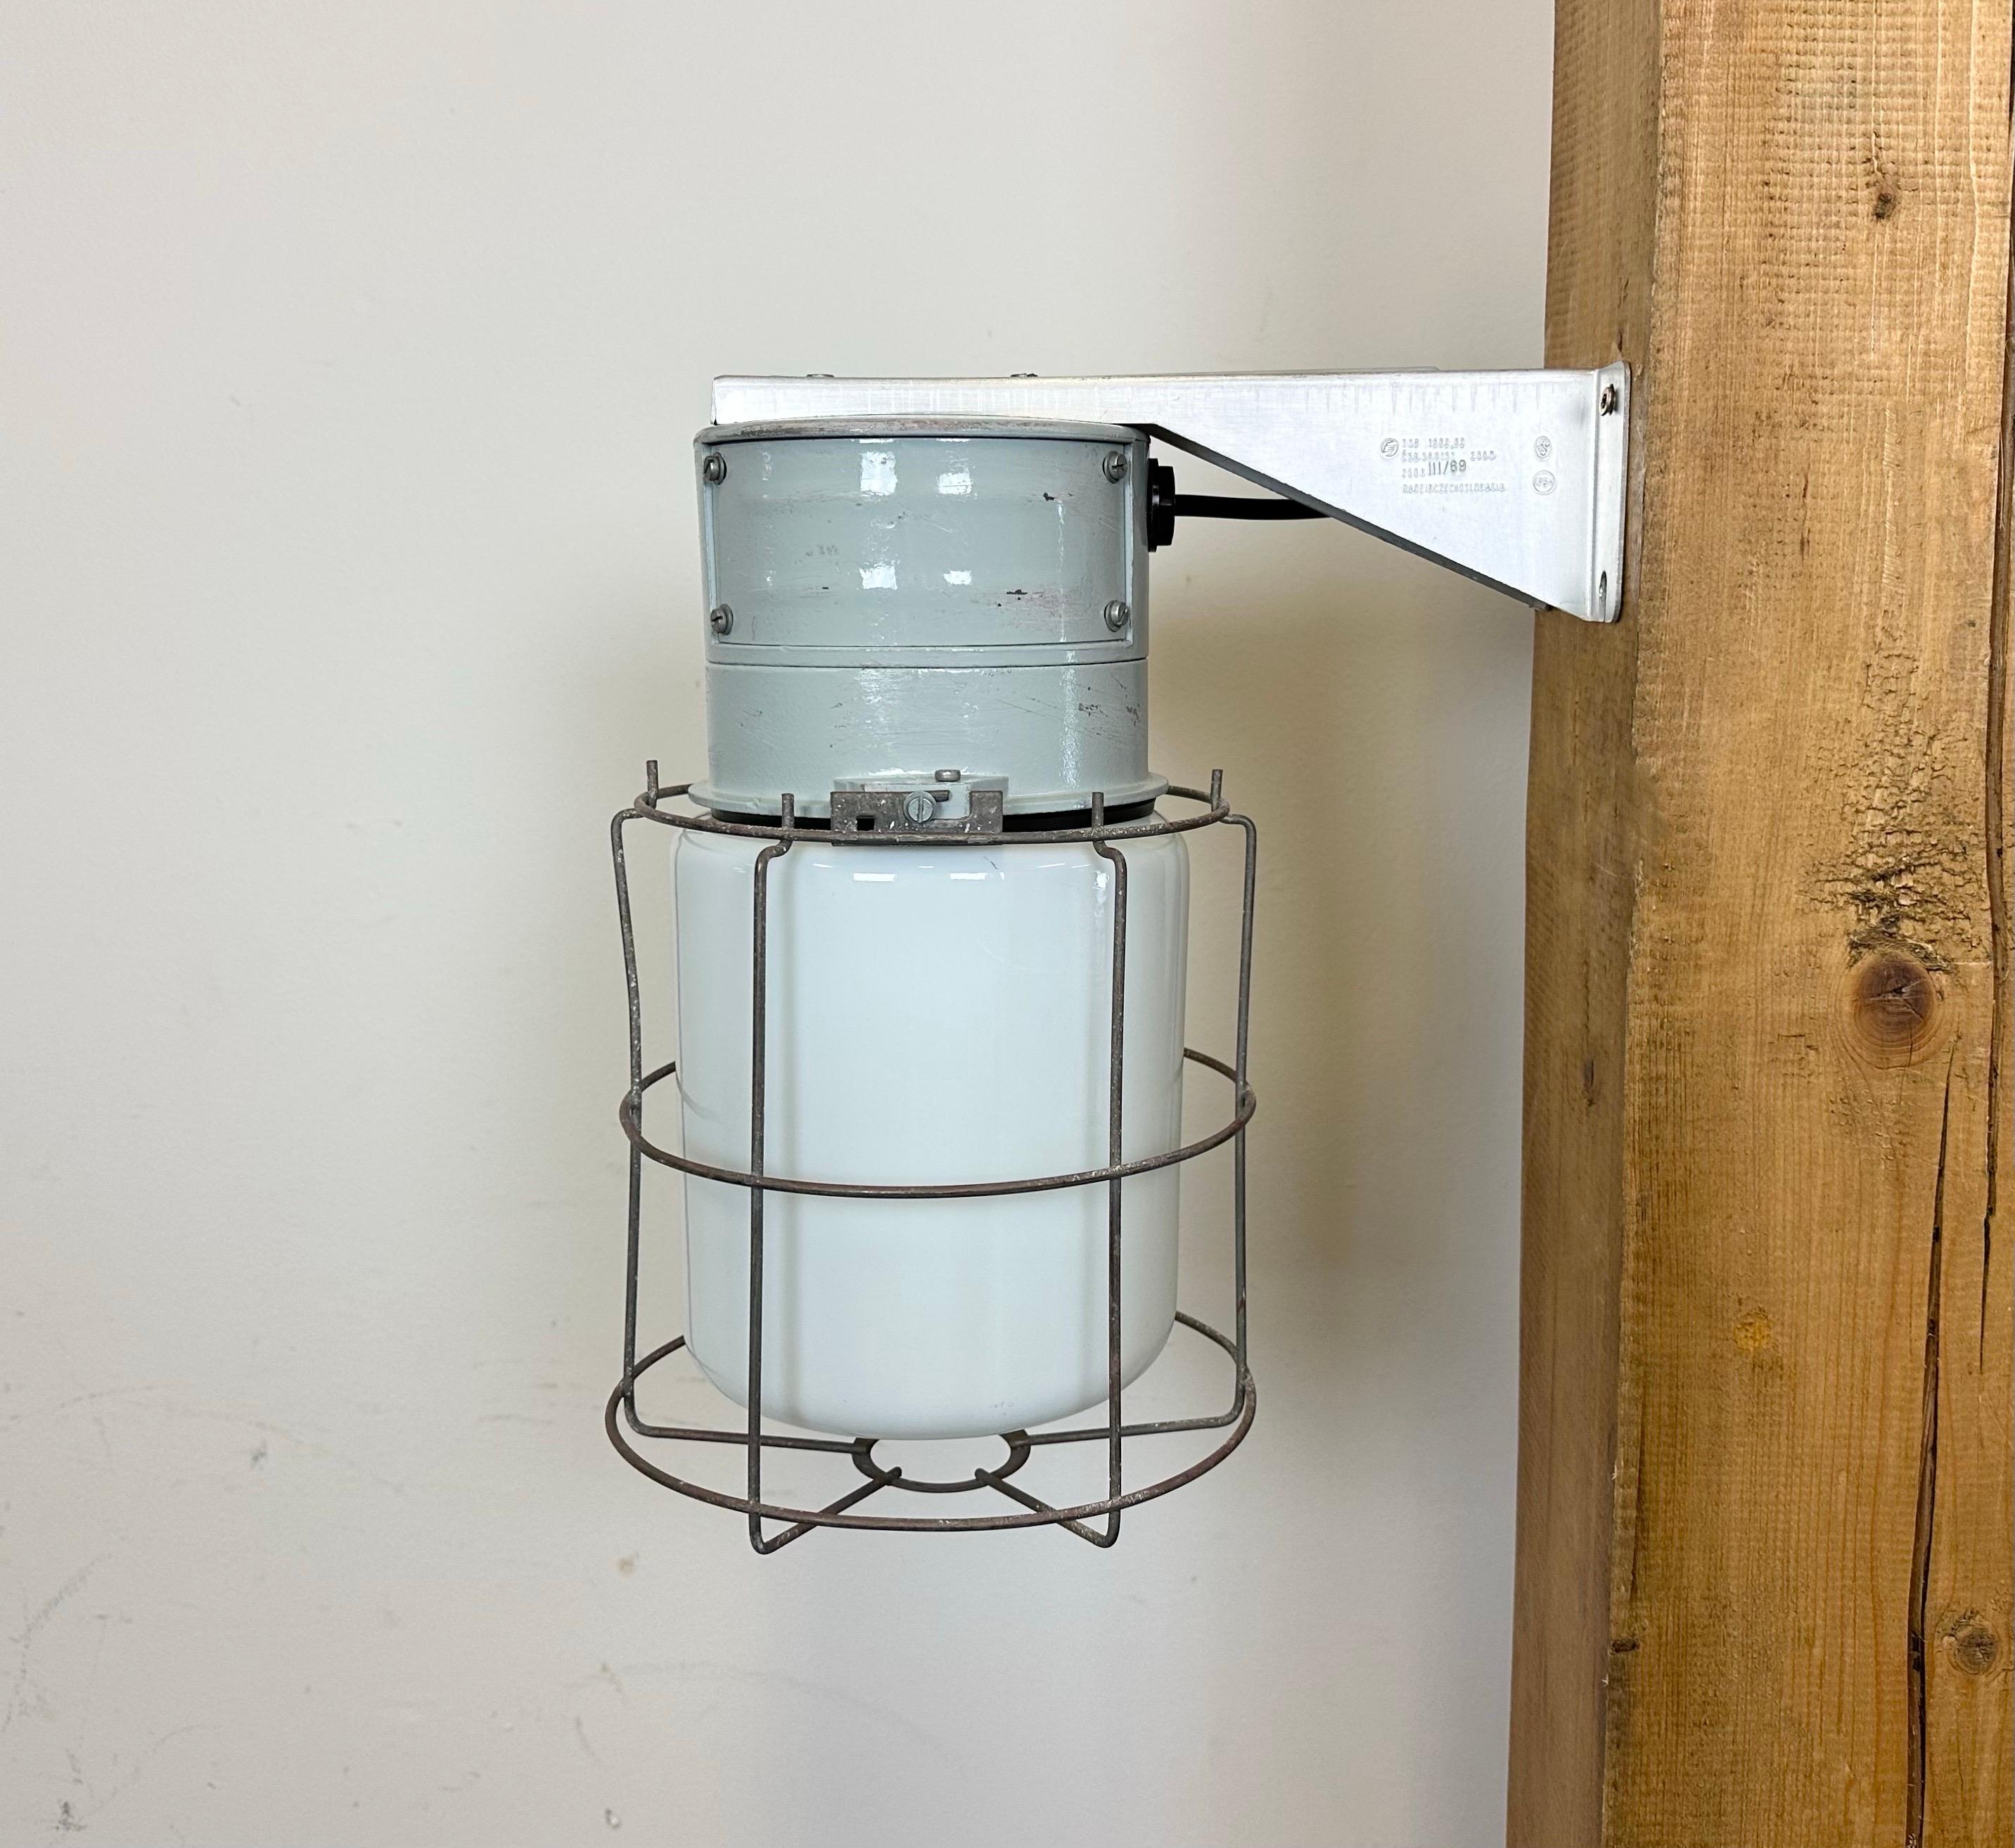 This Industrial wall light was made by Elektrosvit in former Czechoslovakia during the 1970s. It features a cast aluminium wall mounting,an iron grid and a milk glass cover. New porcelain socket requires standard E 27/ E26 light bulbs. New wire. The